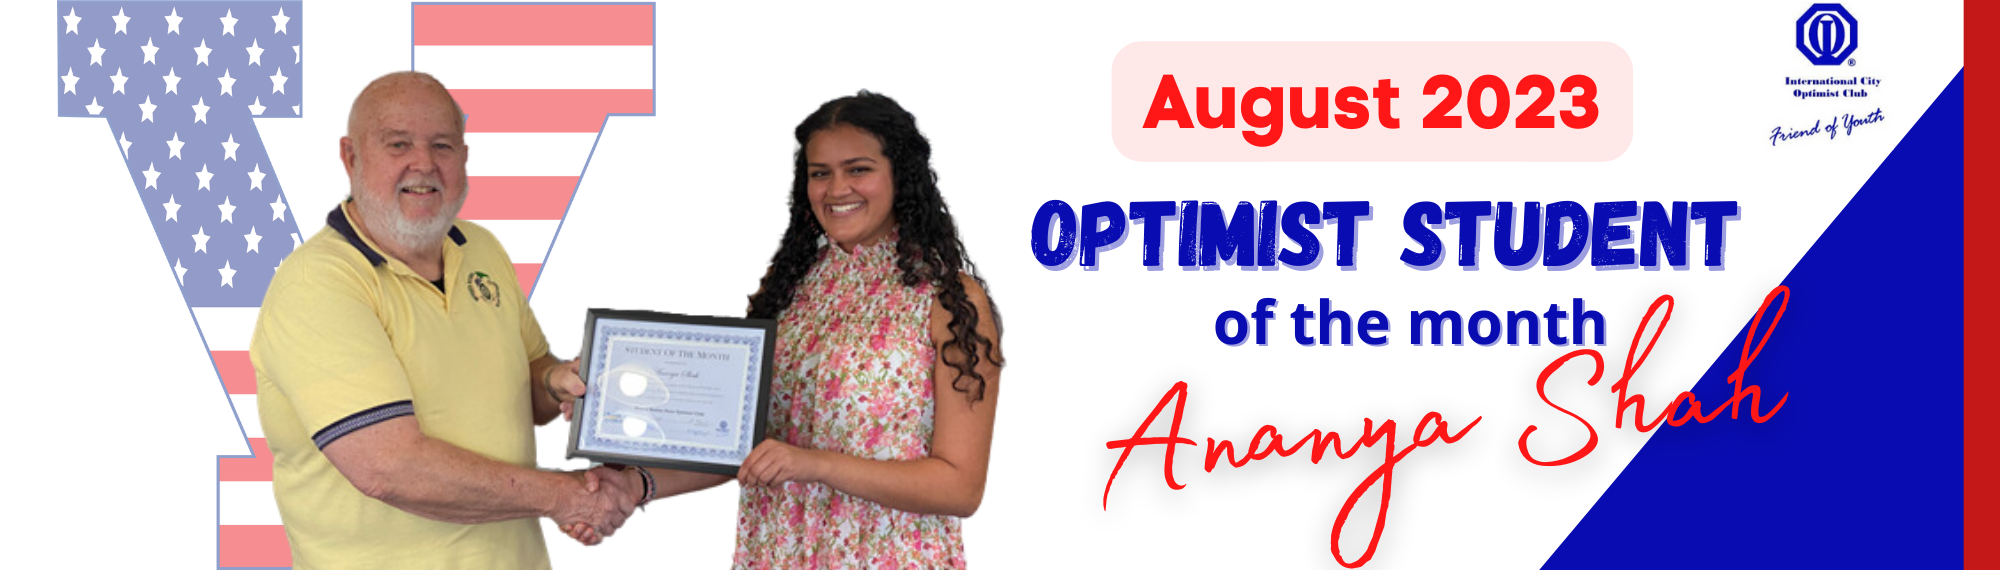 August Optimist Student of the Month